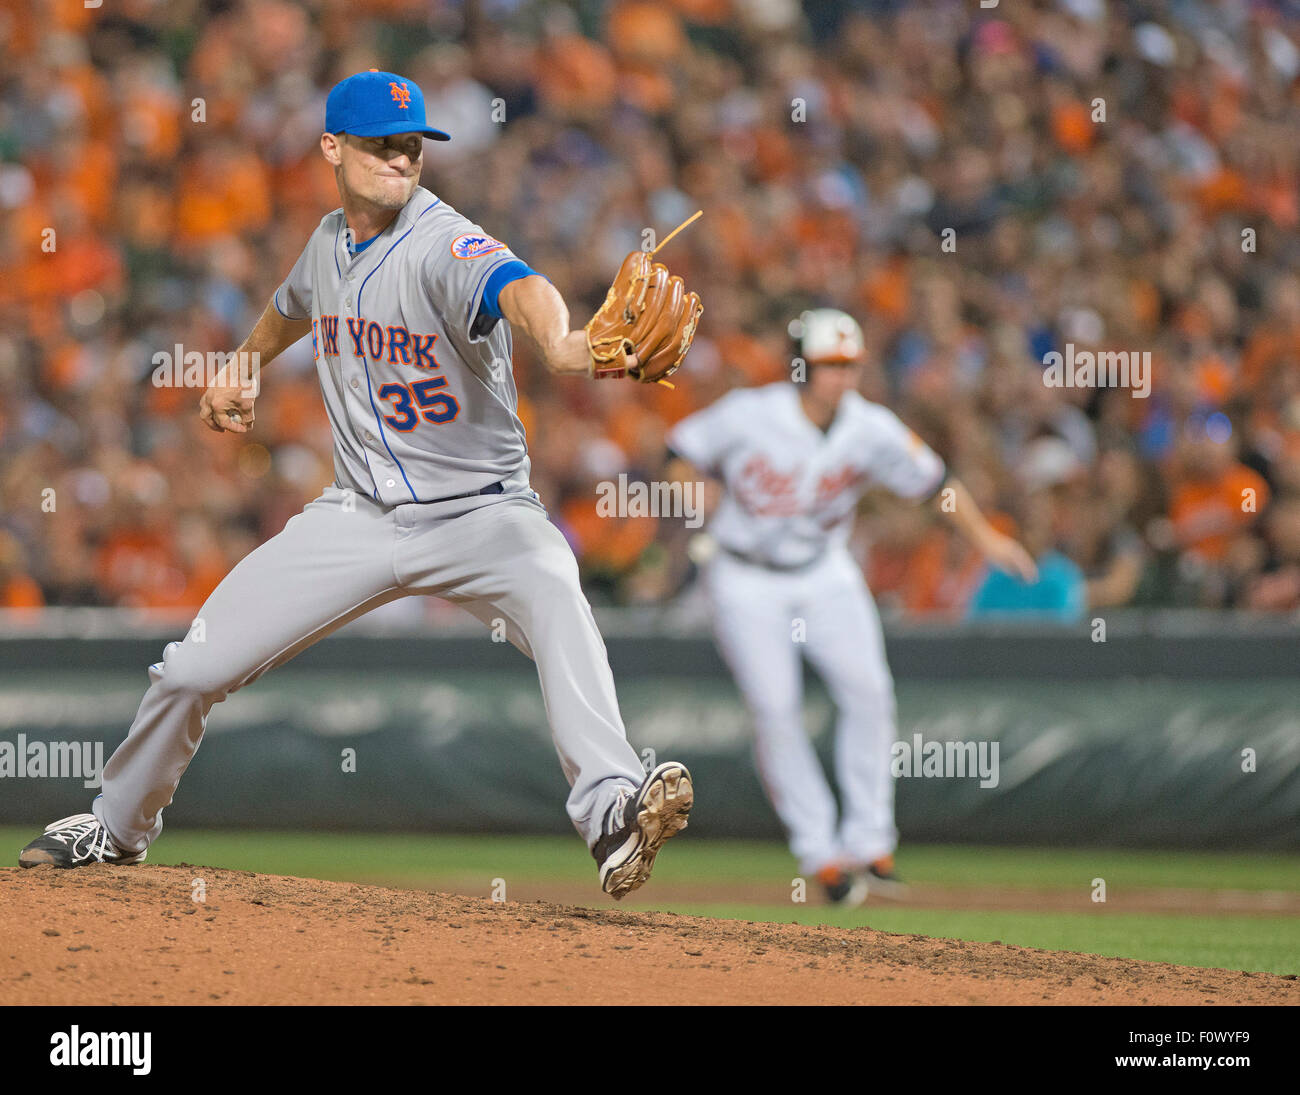 New York Mets relief pitcher Logan Verrett (35) pitches in the sixth inning against the Baltimore Orioles at Oriole Park at Camden Yards in Baltimore, Maryland on Wednesday, August 19, 2015. The Orioles won the game 5 - 4. Credit: Ron Sachs/CNP (RESTRICTION: NO New York or New Jersey Newspapers or newspapers within a 75 mile radius of New York City) - NO WIRE SERVICE - Stock Photo